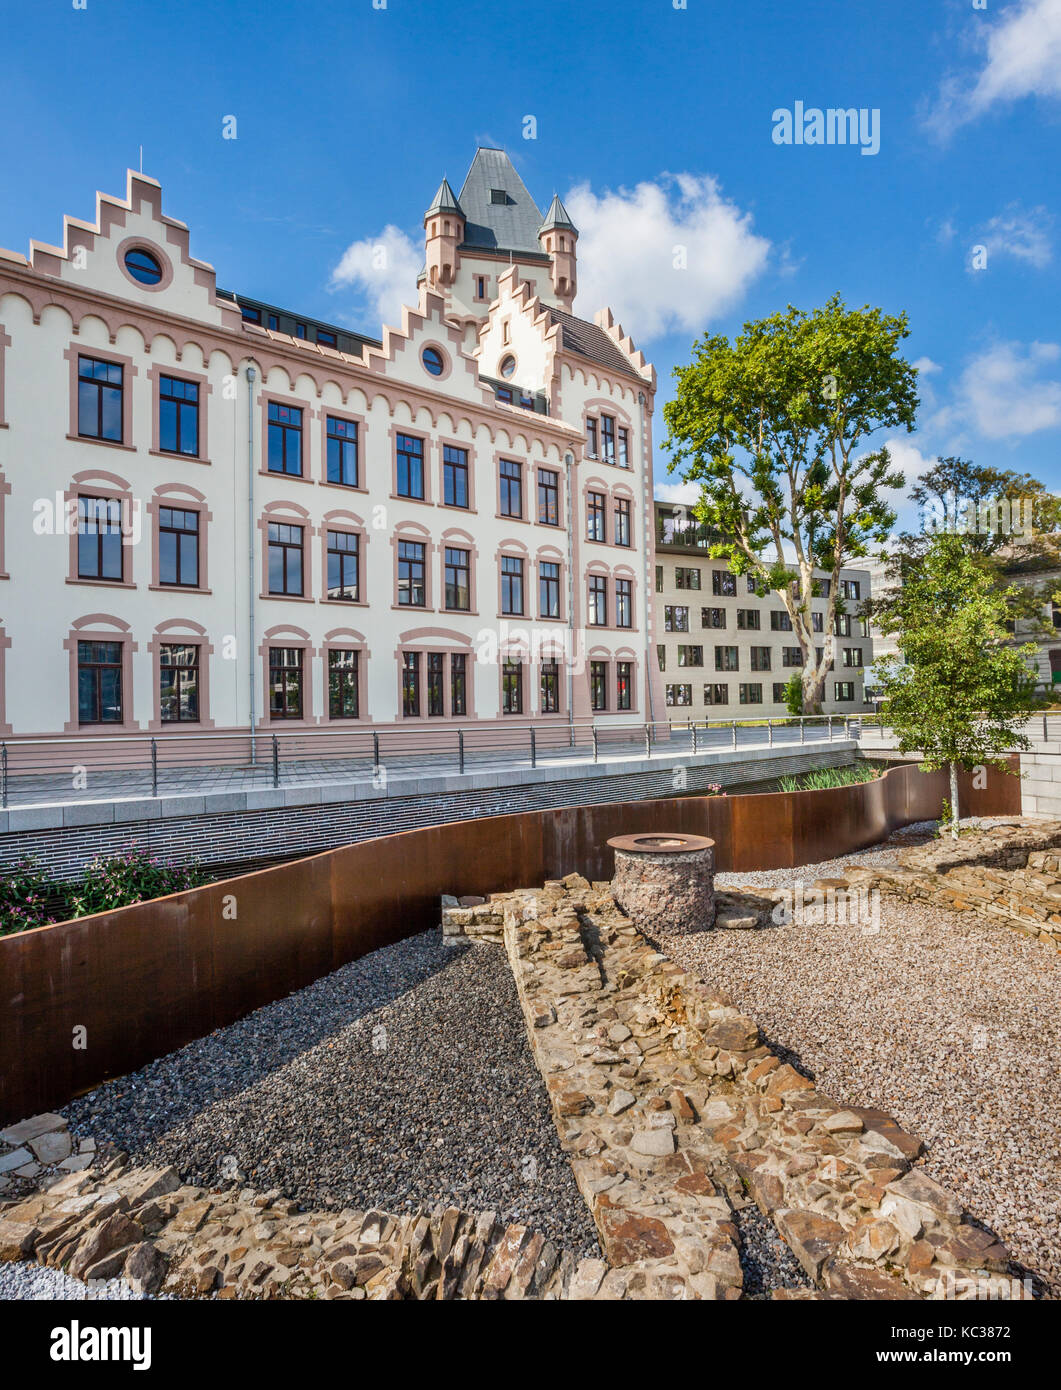 Germany, North Rhine-Westphalia, Dortmund-Hörde, view of the Hörde Castle with Hörde brook with excaved old castle foundations Stock Photo